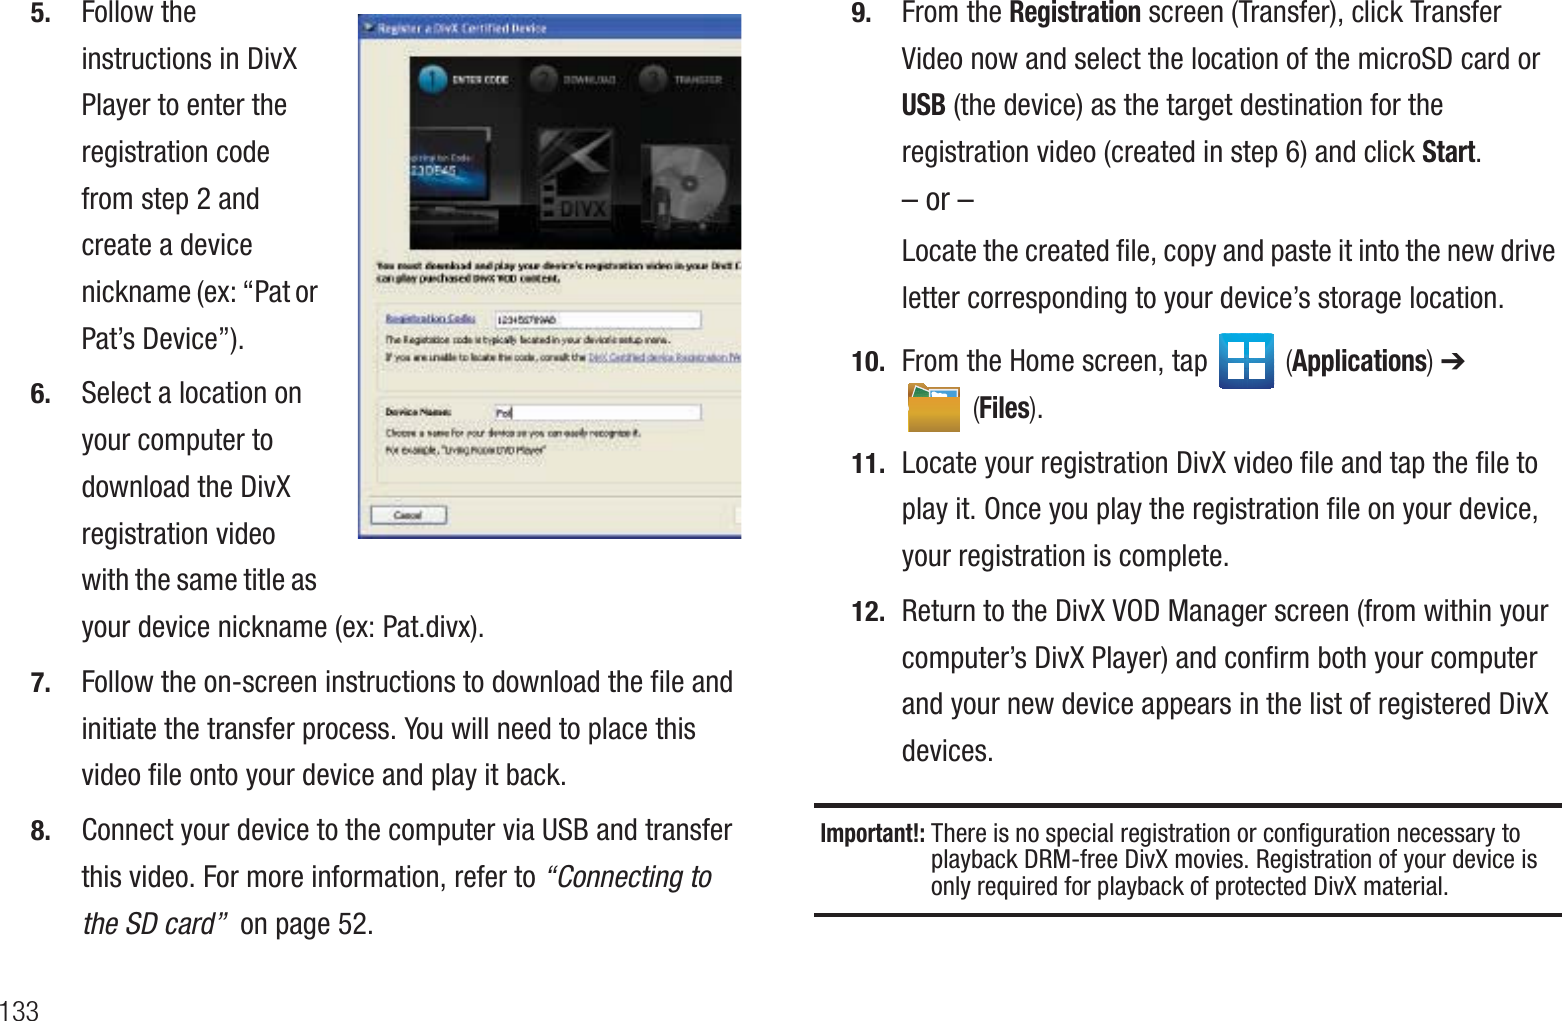 1335. Follow the instructions in DivX Player to enter the registration code from step 2 and create a device nickname (ex: “Pat or Pat’s Device”).6. Select a location on your computer to download the DivX registration video with the same title as your device nickname (ex: Pat.divx).7. Follow the on-screen instructions to download the file and initiate the transfer process. You will need to place this video file onto your device and play it back.8. Connect your device to the computer via USB and transfer this video. For more information, refer to “Connecting to the SD card”  on page 52.9. From the Registration screen (Transfer), click Transfer Video now and select the location of the microSD card or  USB (the device) as the target destination for the registration video (created in step 6) and click Start.– or –Locate the created file, copy and paste it into the new drive letter corresponding to your device’s storage location.10. From the Home screen, tap   (Applications) ➔  (Files). 11. Locate your registration DivX video file and tap the file to play it. Once you play the registration file on your device, your registration is complete.12. Return to the DivX VOD Manager screen (from within your computer’s DivX Player) and confirm both your computer and your new device appears in the list of registered DivX devices.Important!: There is no special registration or configuration necessary to playback DRM-free DivX movies. Registration of your device is only required for playback of protected DivX material.